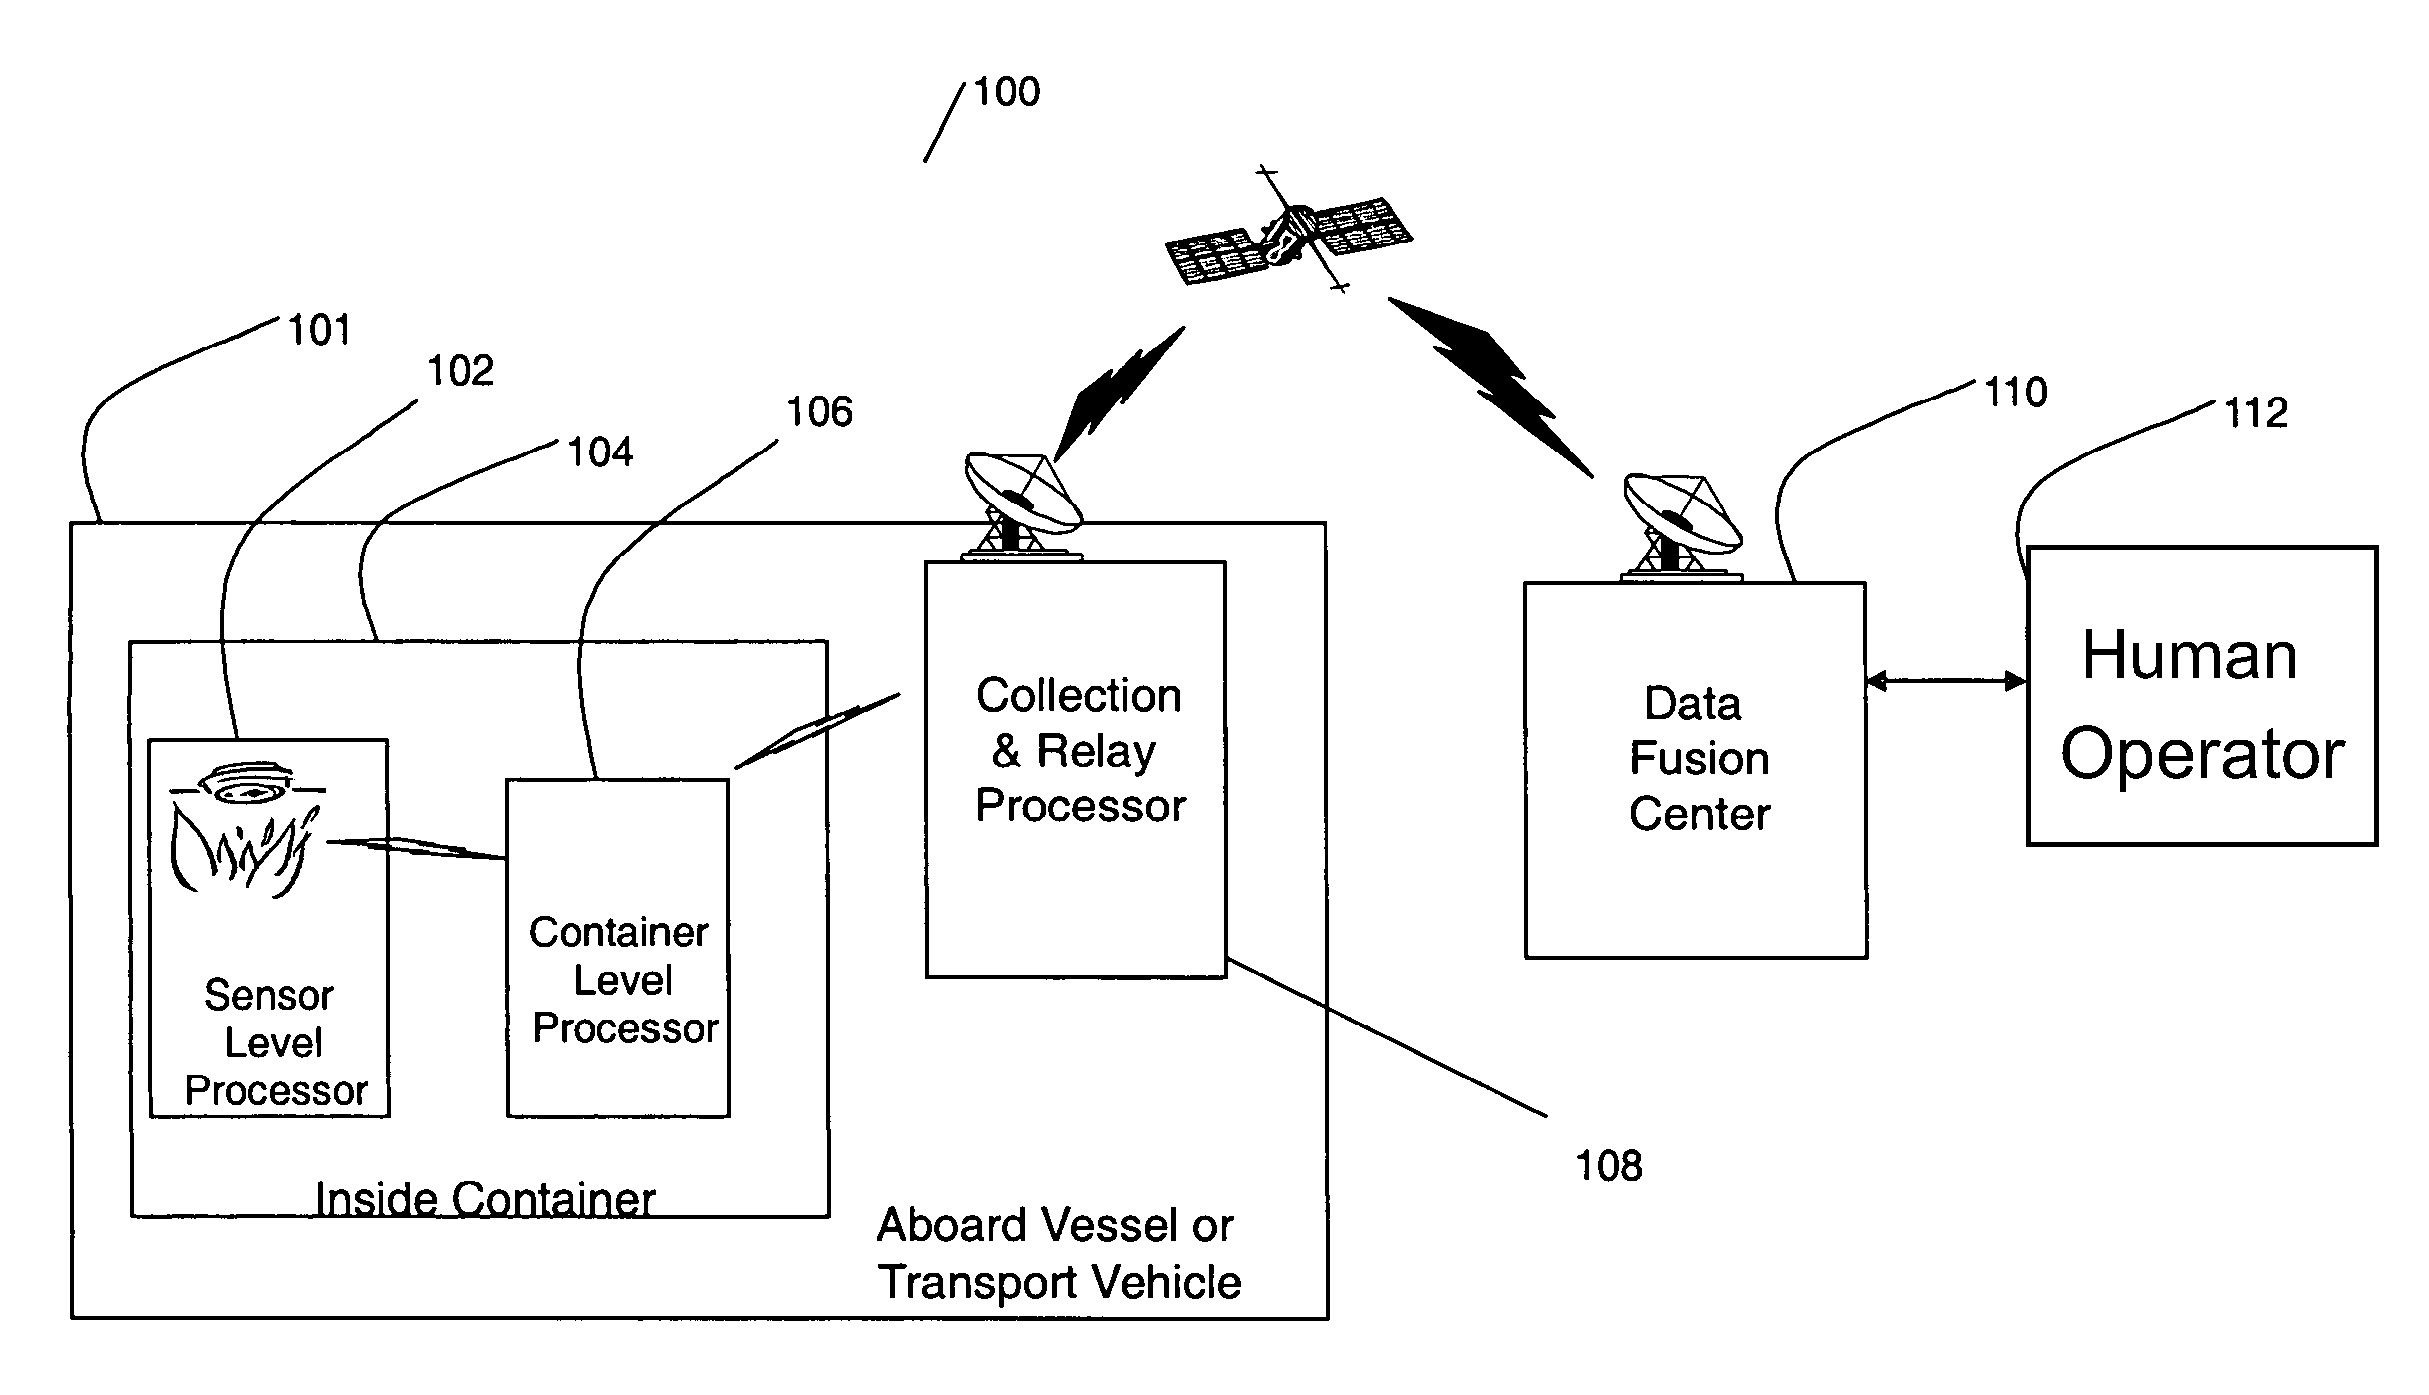 Hierarchical and distributed information processing architecture for a container security system